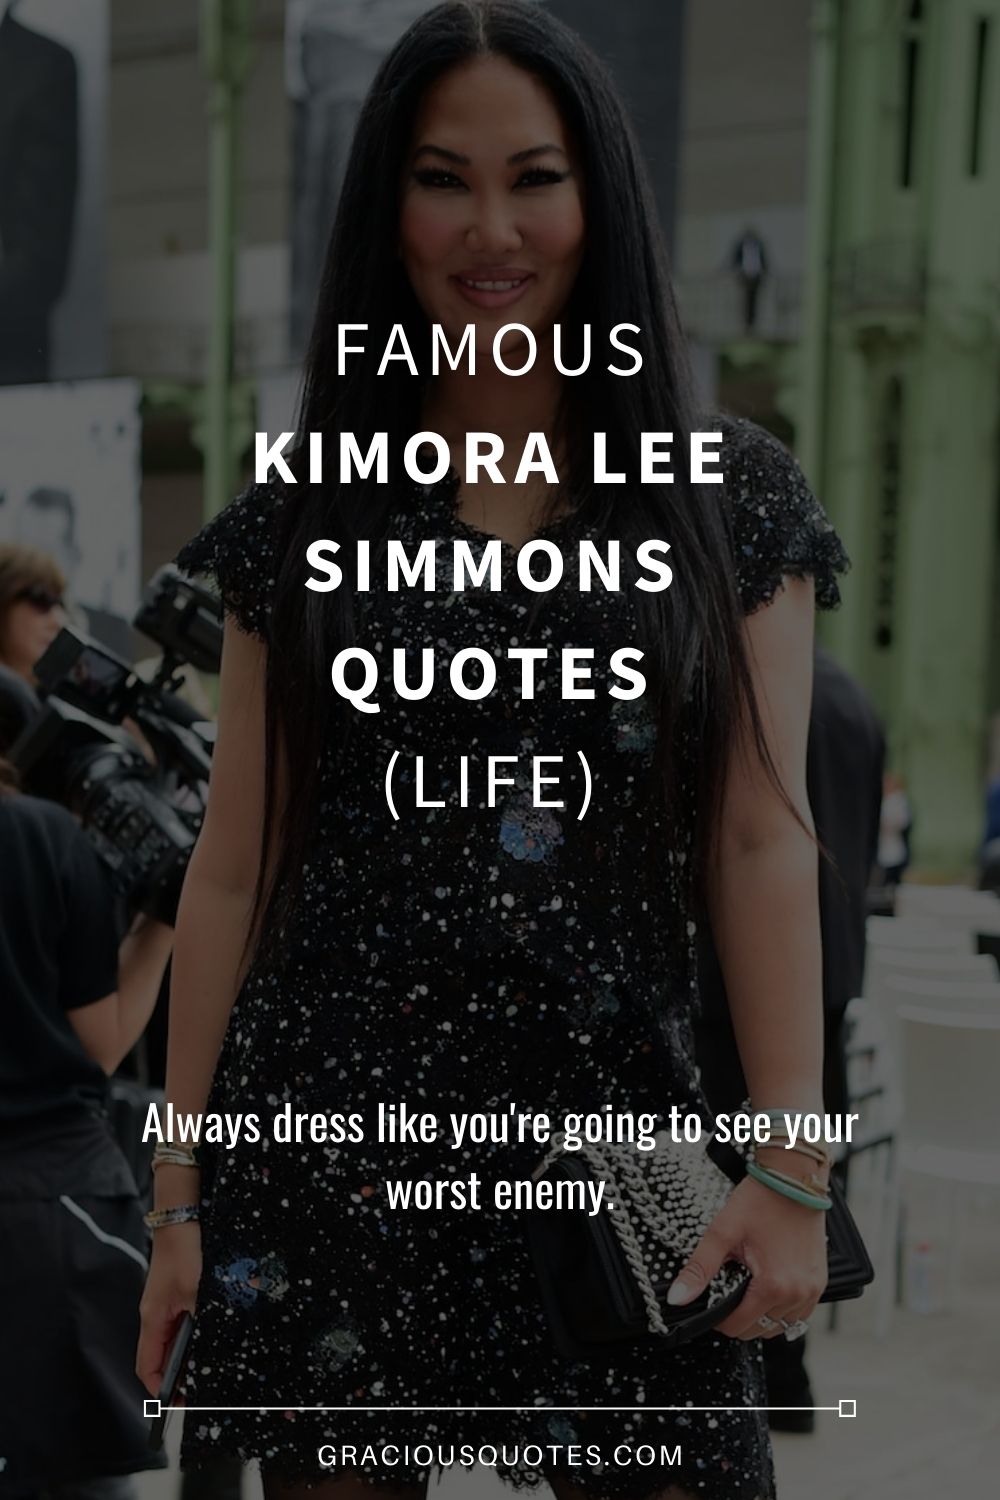 Famous Kimora Lee Simmons Quotes (LIFE) - Gracious Quotes